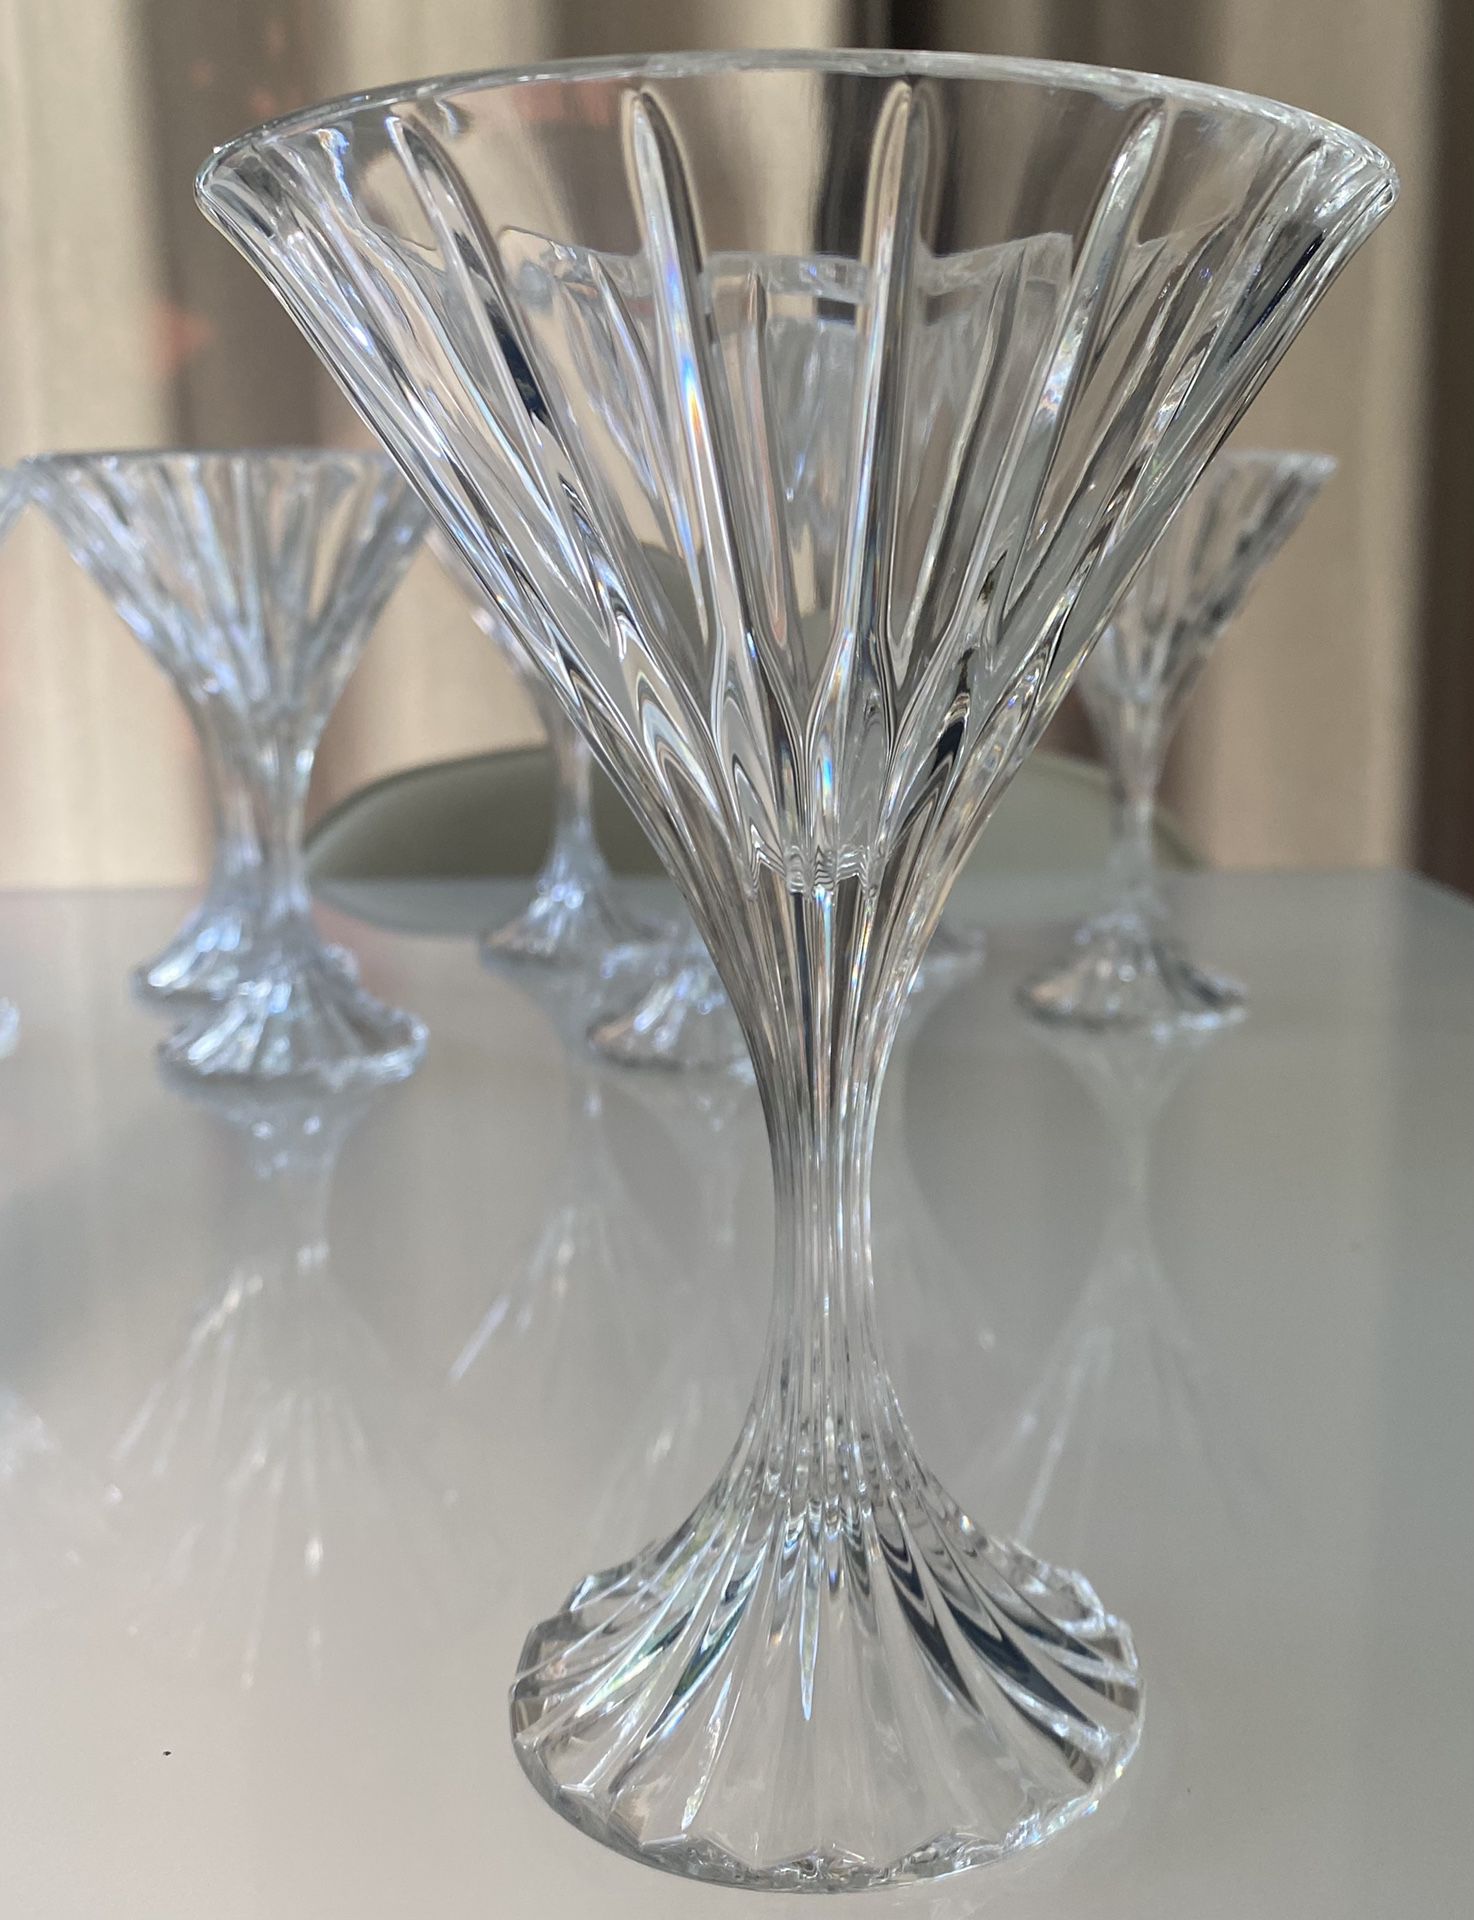 Mikasa Etched Martini Glasses Set Of 4 for Sale in Tacoma, WA - OfferUp